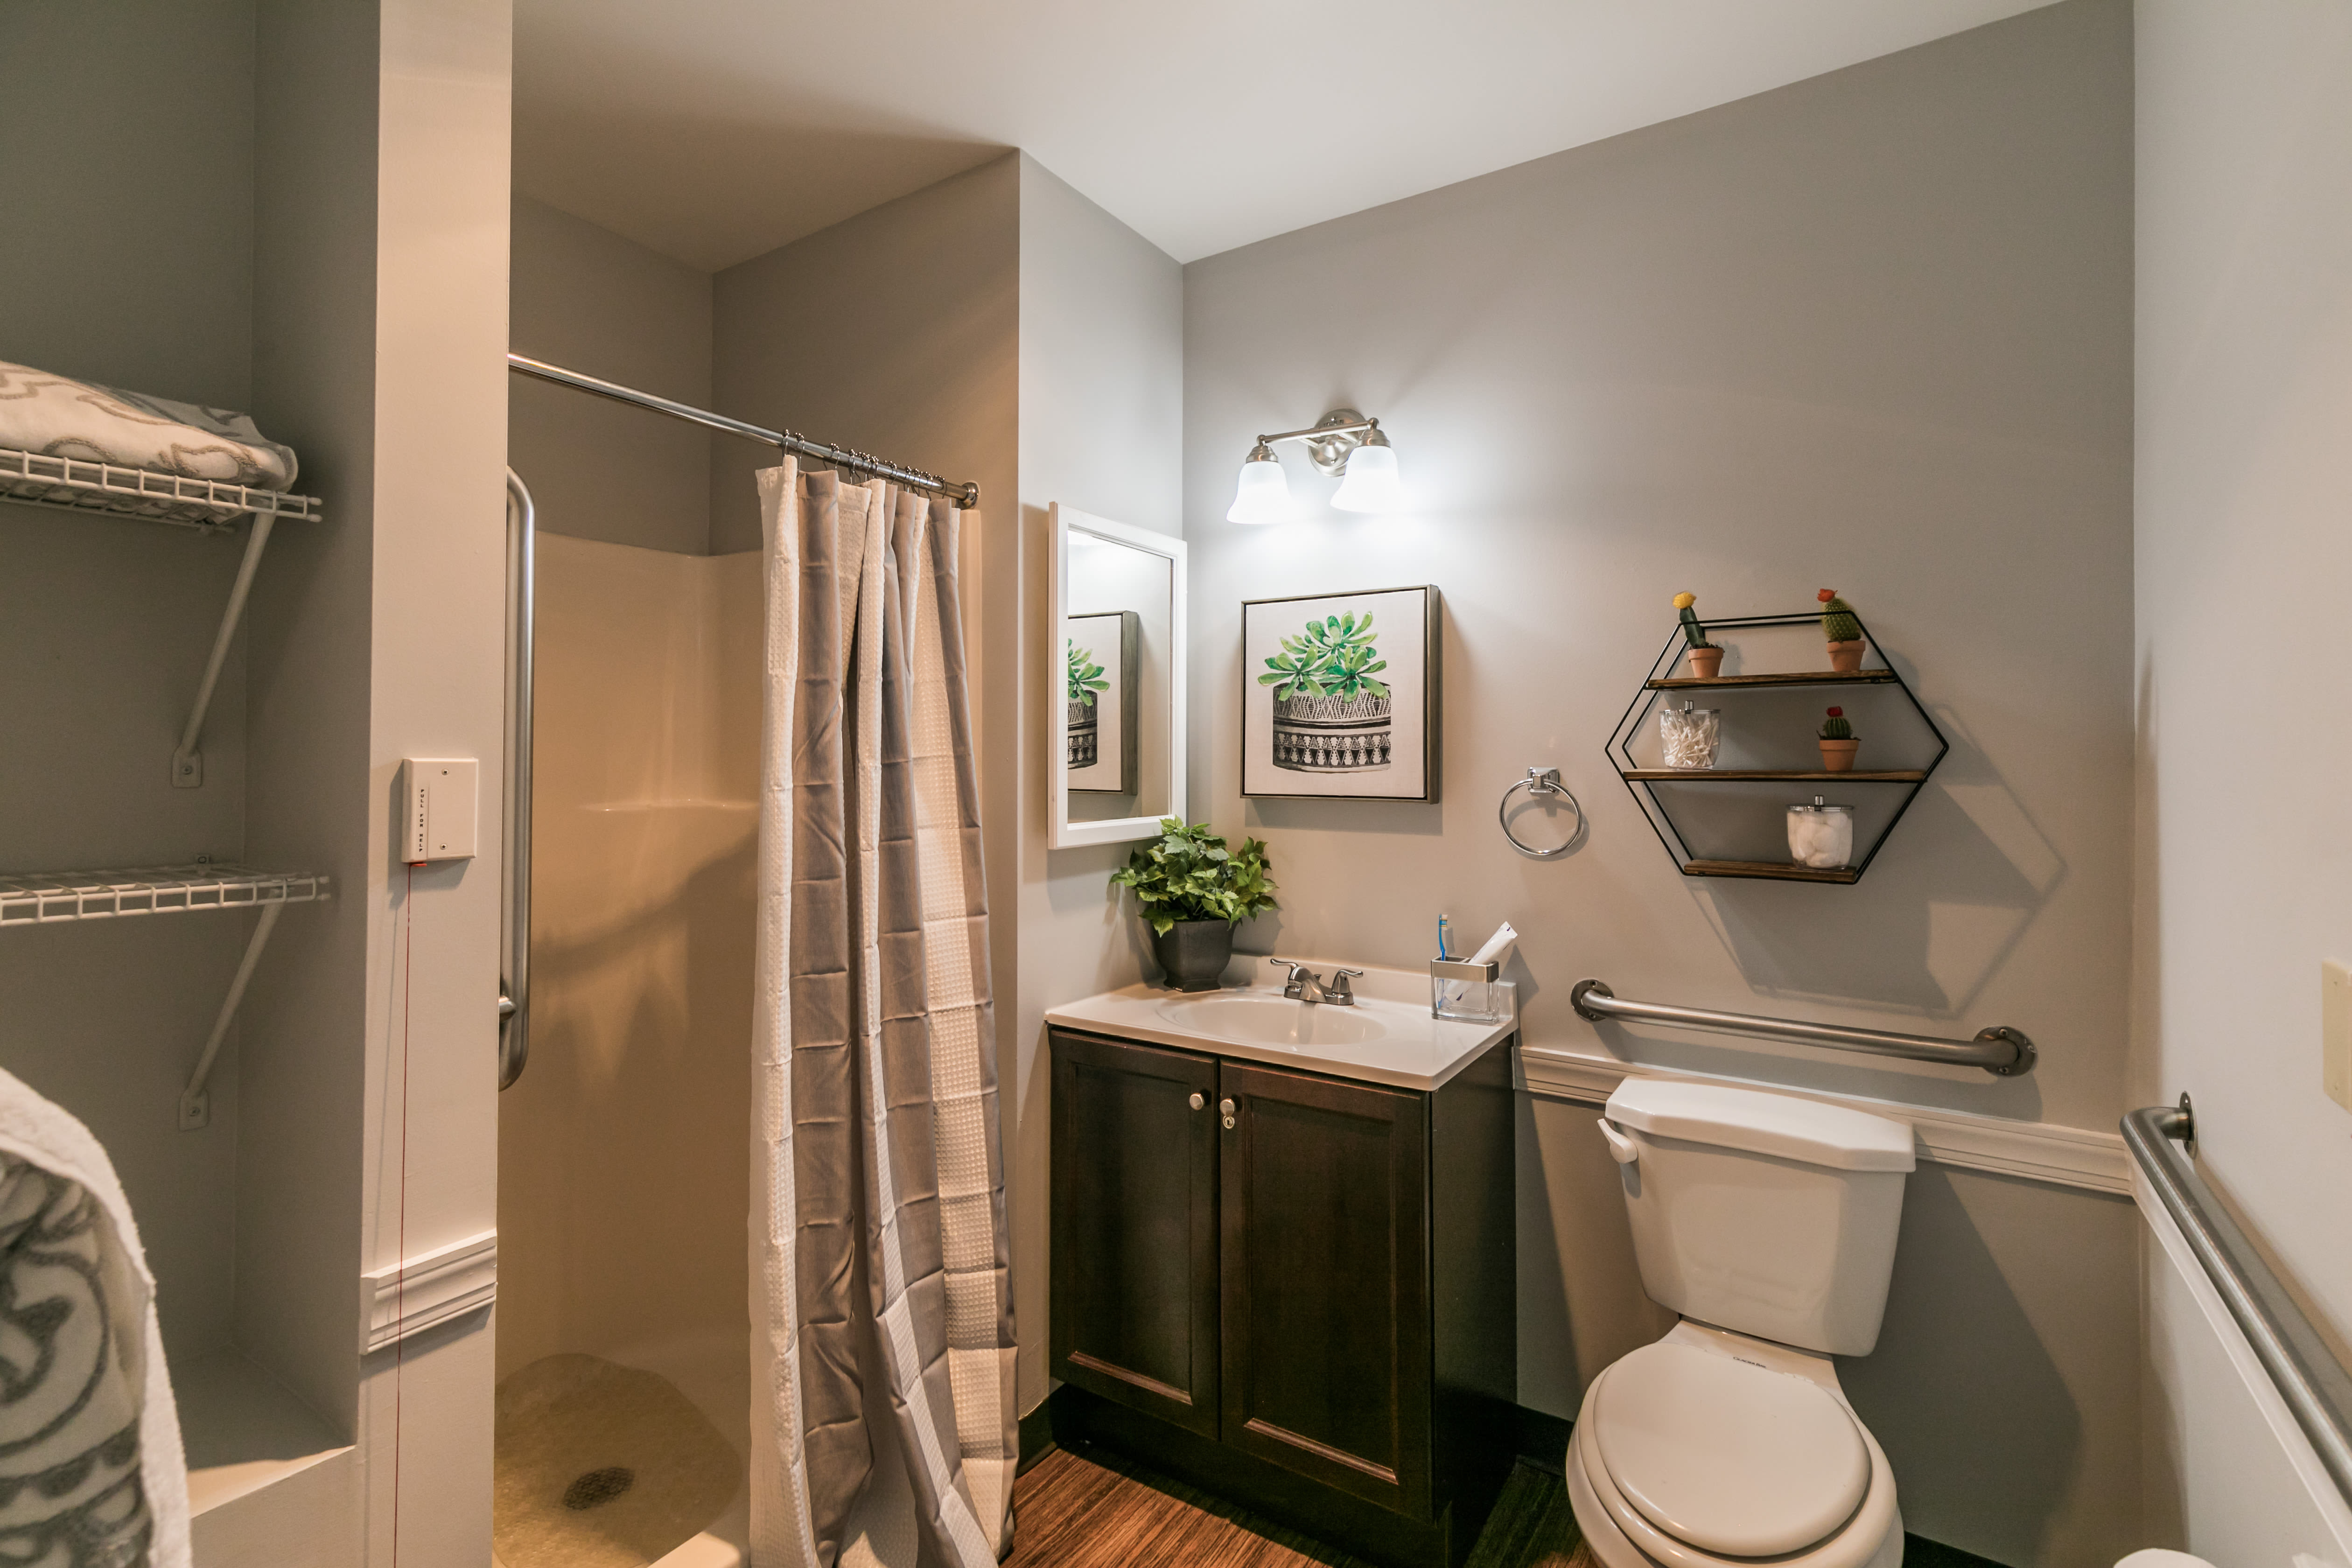 Private apartment bath at Keepsake Village at Greenpoint in Liverpool, New York